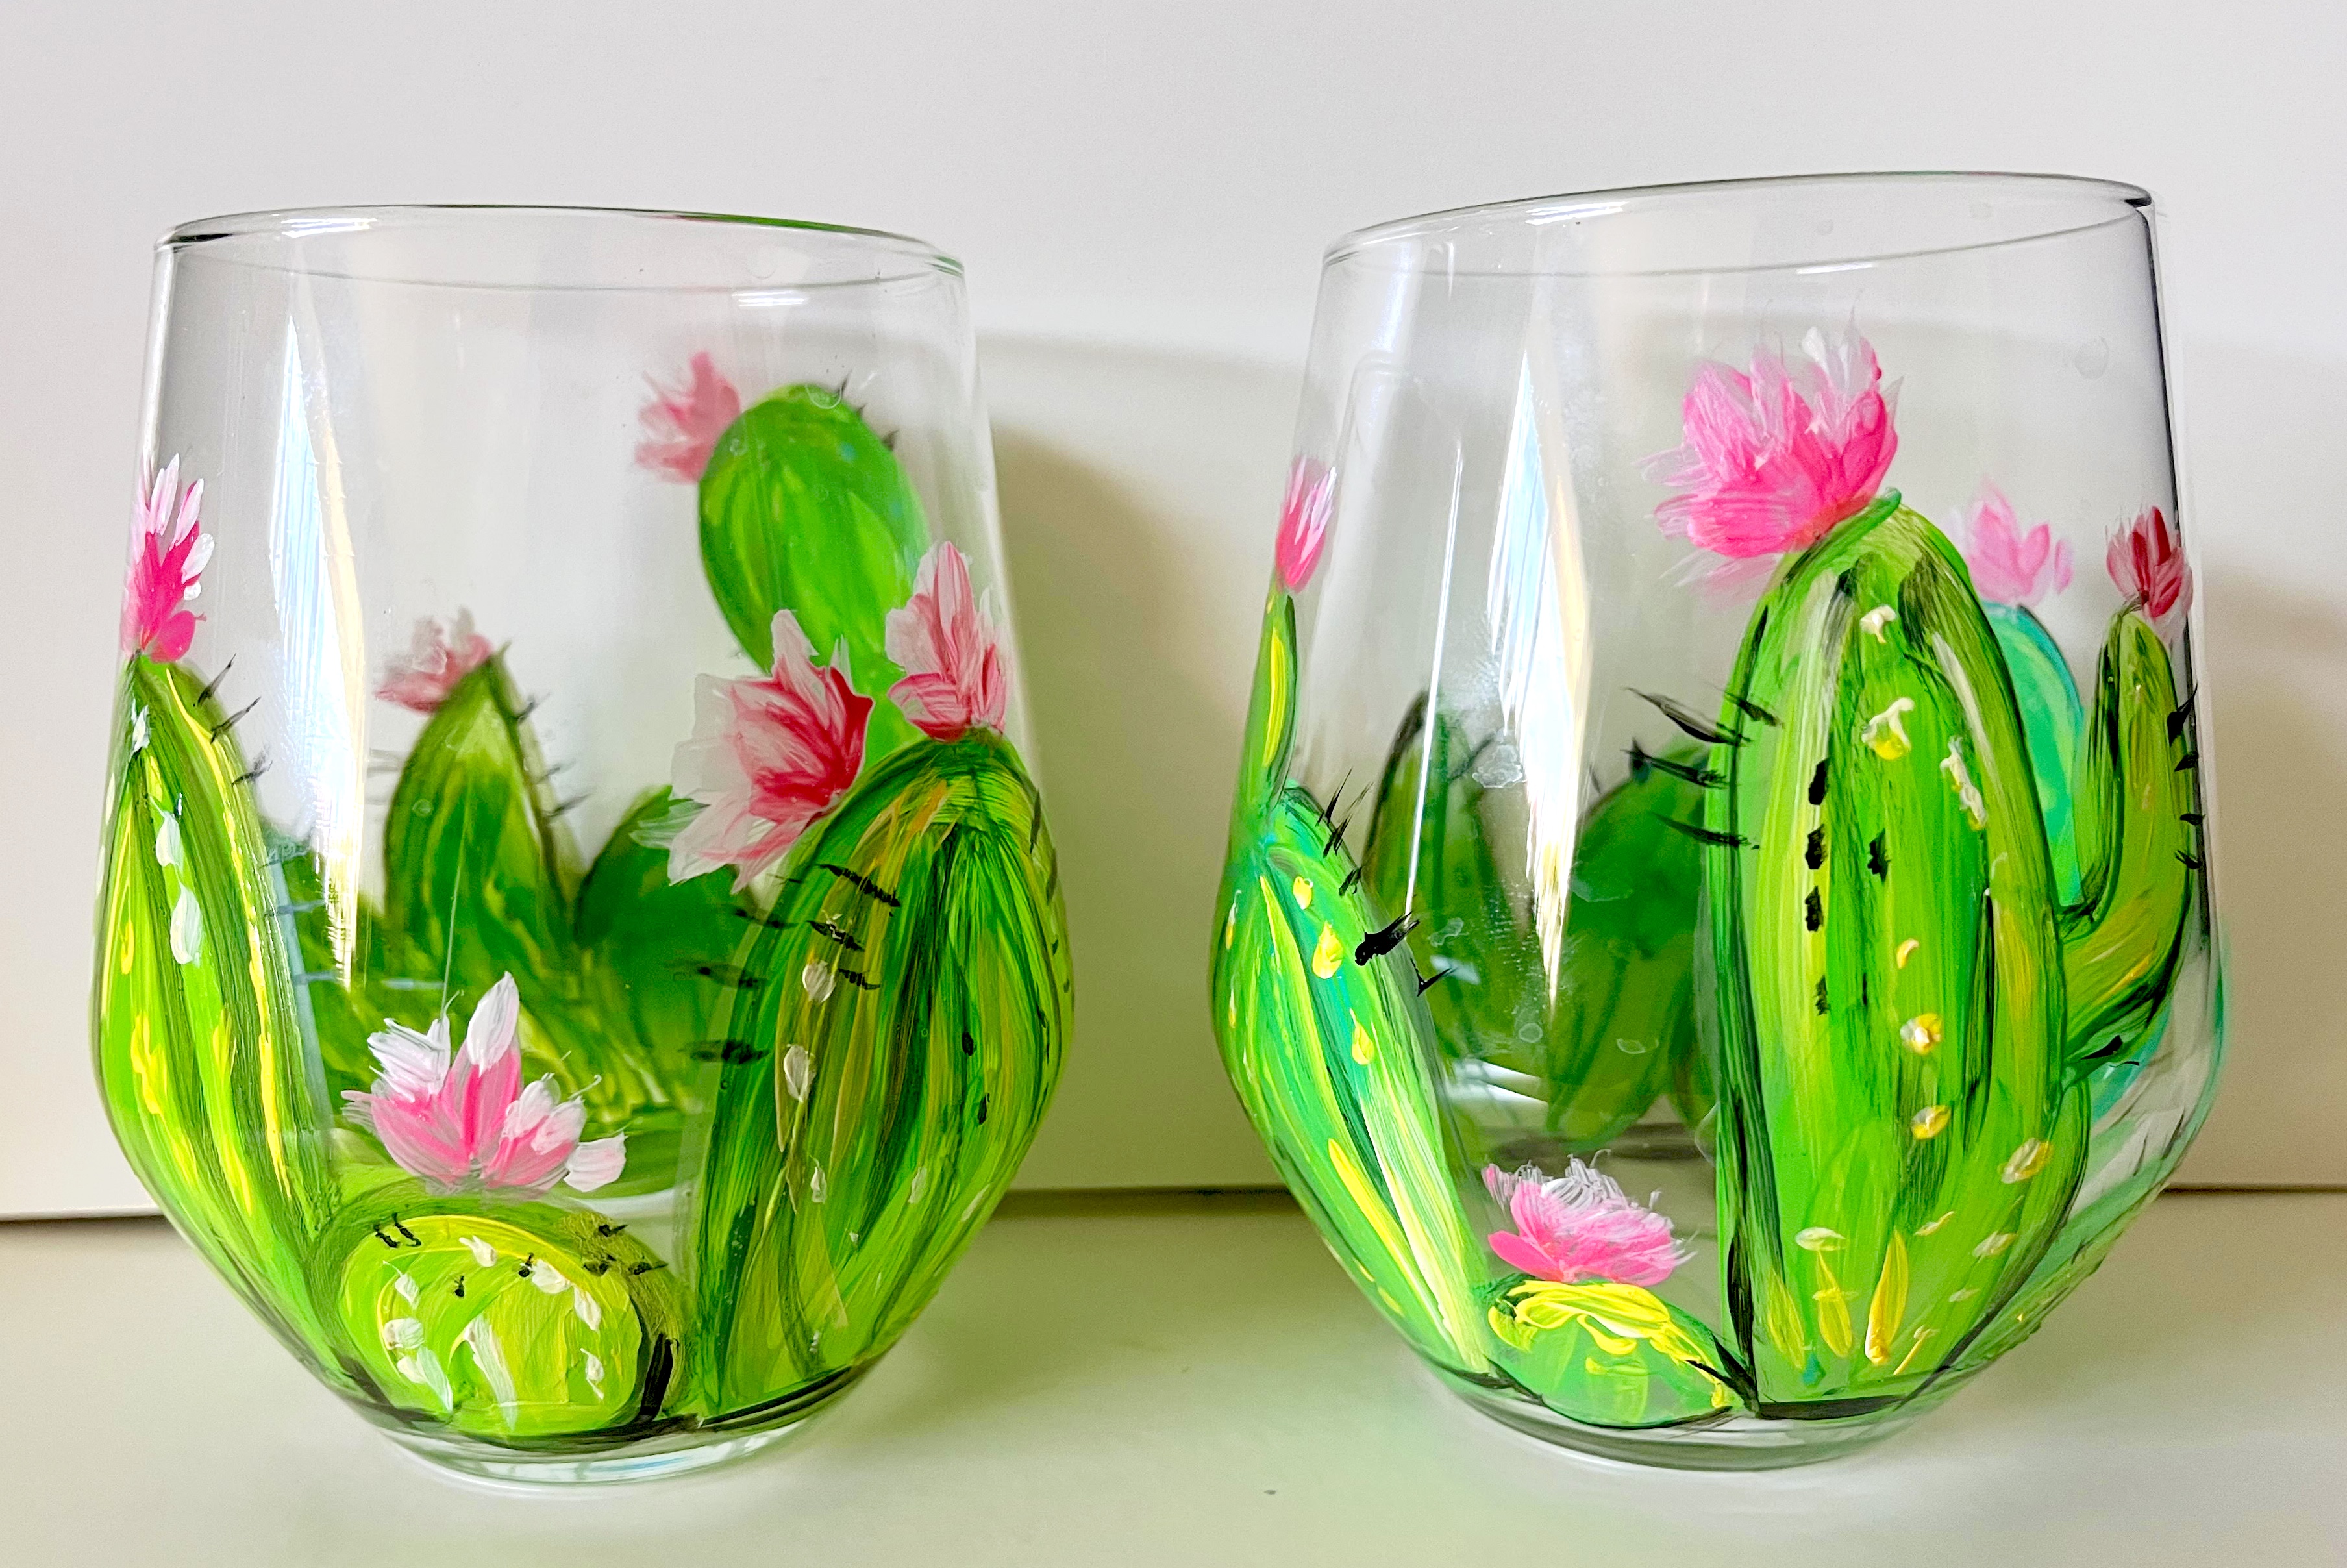 https://s3fs.paintnite.com/yaymaker-images/nite-out/original/ng4ty-10018584-cute-cactus-wine-glasses.jpg